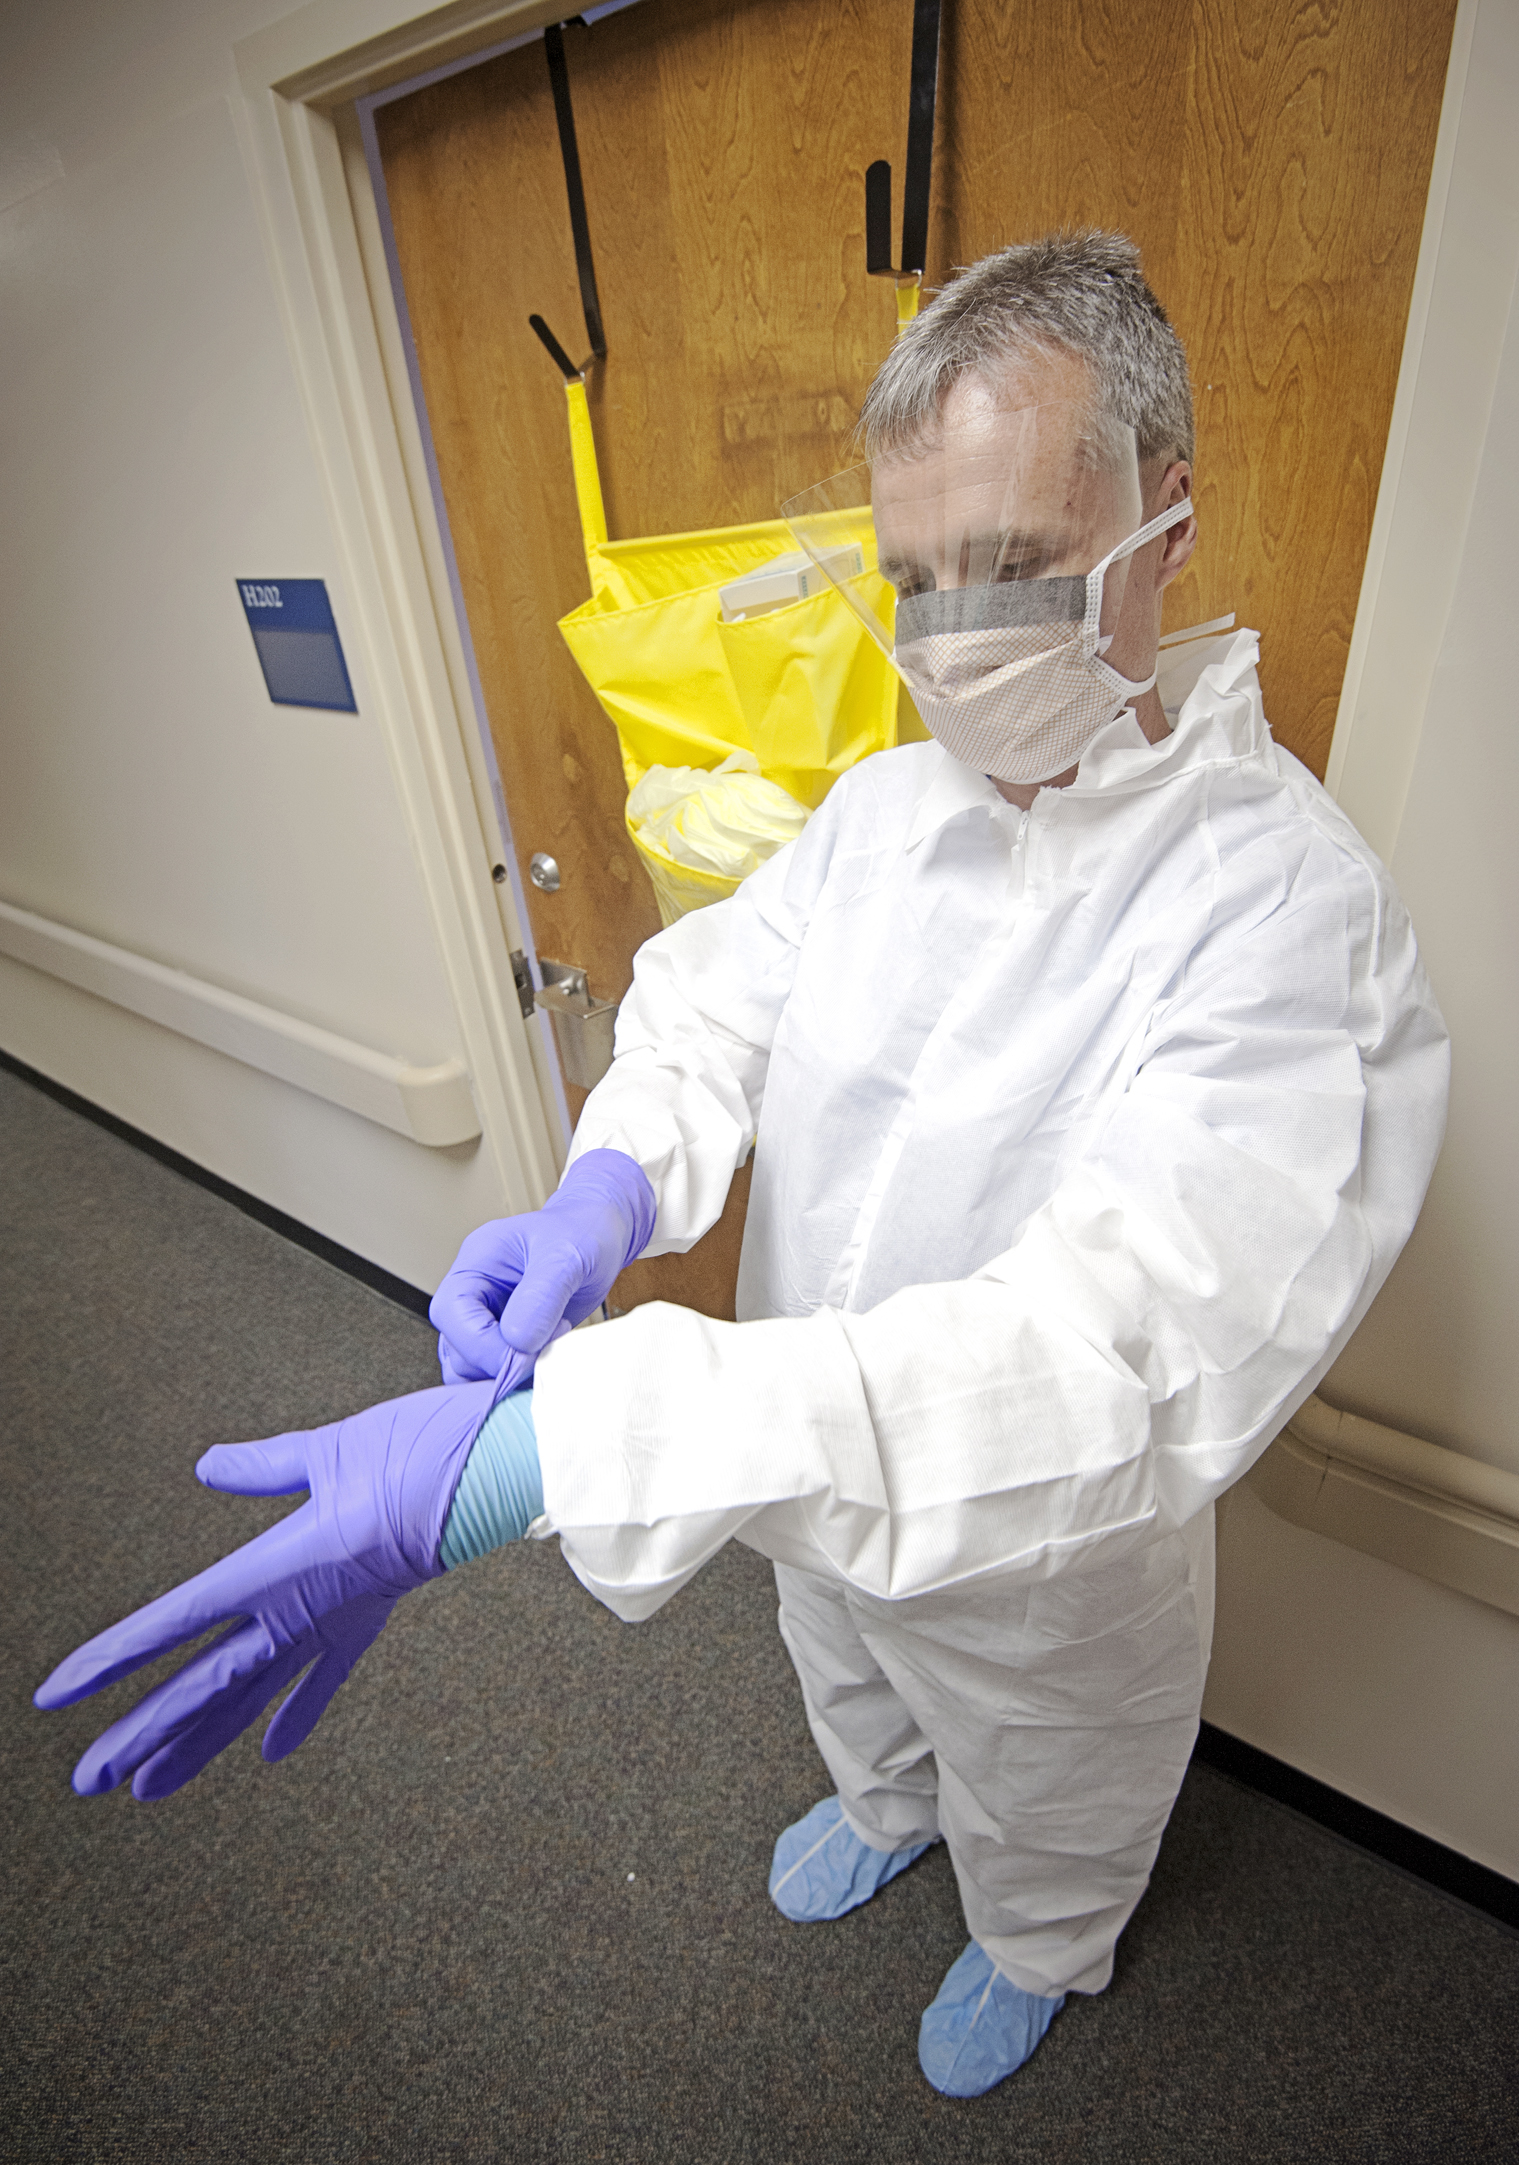 University of Mississippi Medical Center infection preventionist Morris Ainsworth dons two pairs of gloves after putting on a face shield, face mask, shoe coverings and what's called a protective "bunny suit" that health-care providers must wear when caring for patients with communicable diseases, including if necessary the deadly Ebola virus.